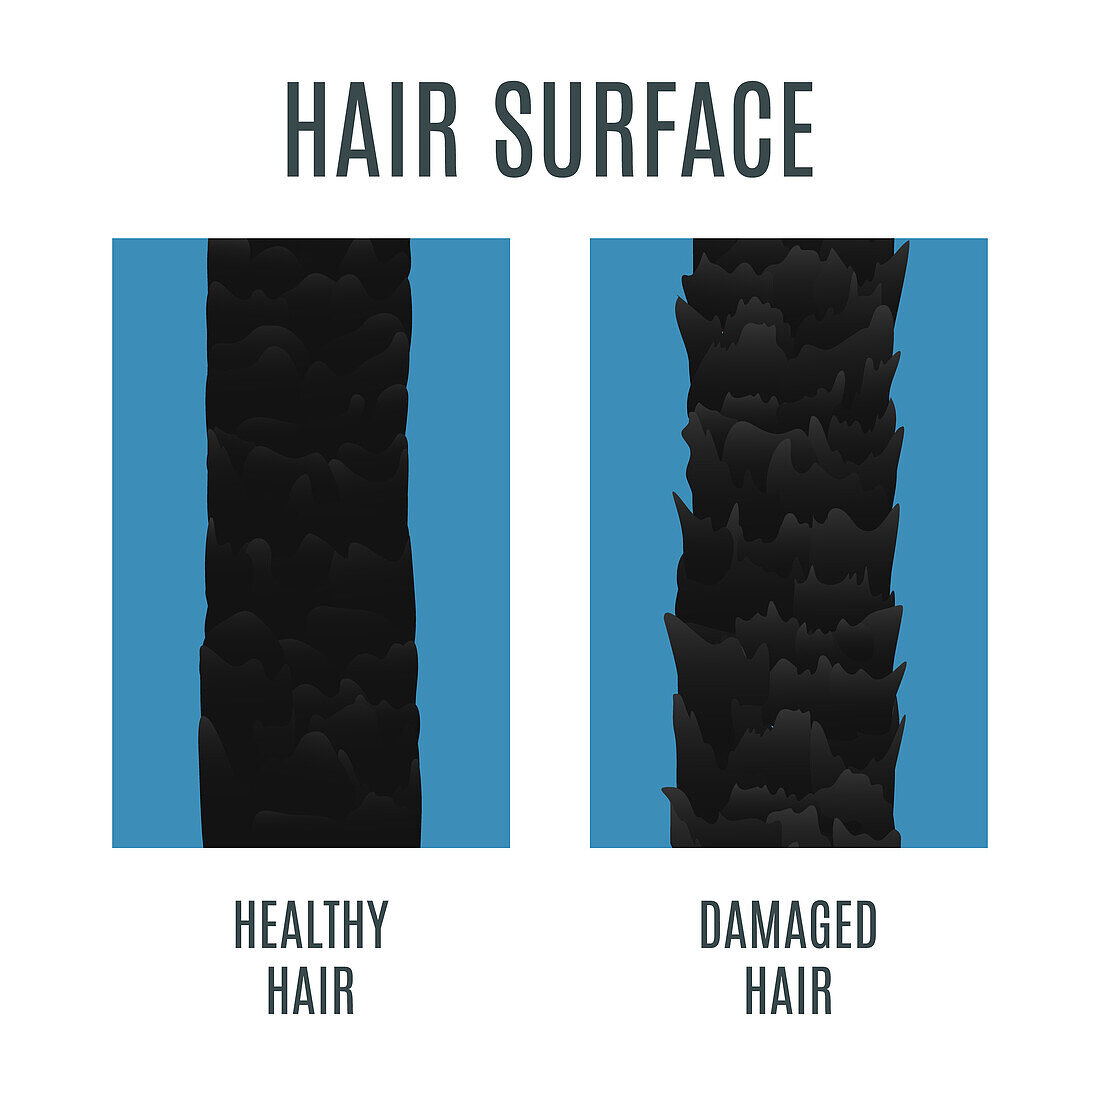 Healthy and damaged hair surface, conceptual illustration